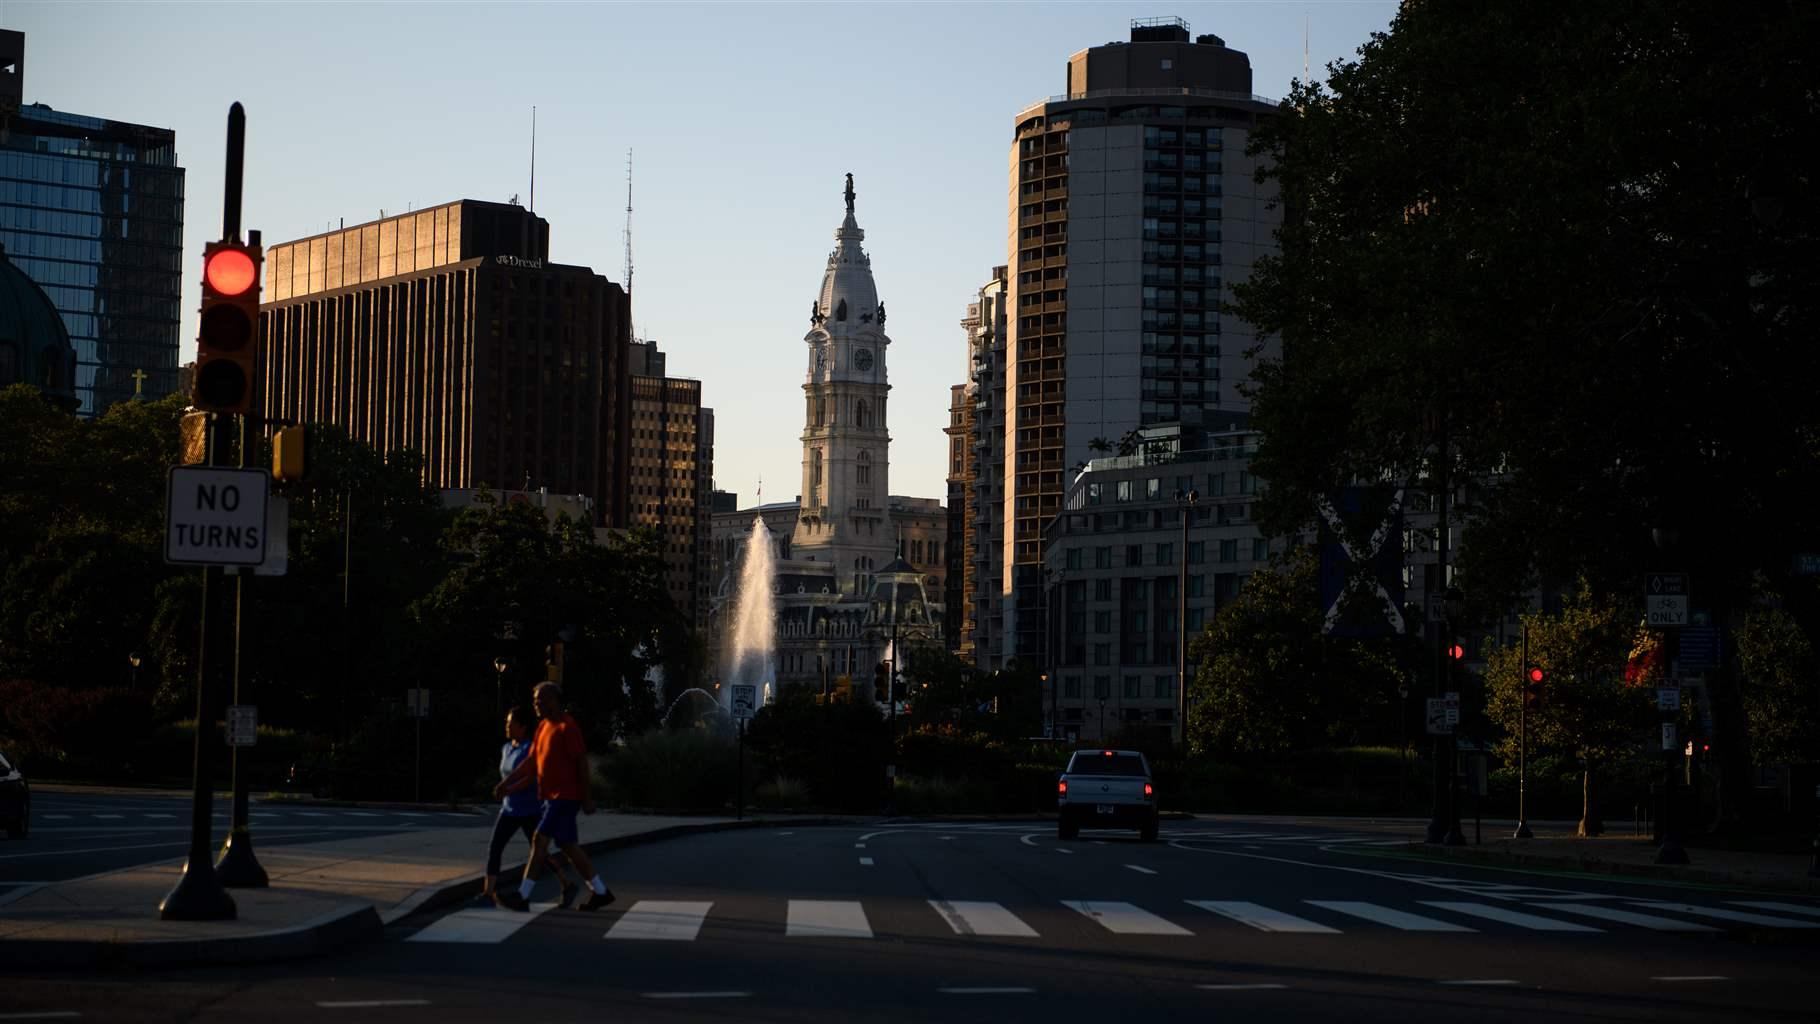 A plume of water from Swann Memorial Fountain sprays skyward in front of City Hall’s central tower, which sits in the middle of several tall downtown buildings. Two pedestrians in casual attire walk on a crosswalk in heavy shadow in the foreground.